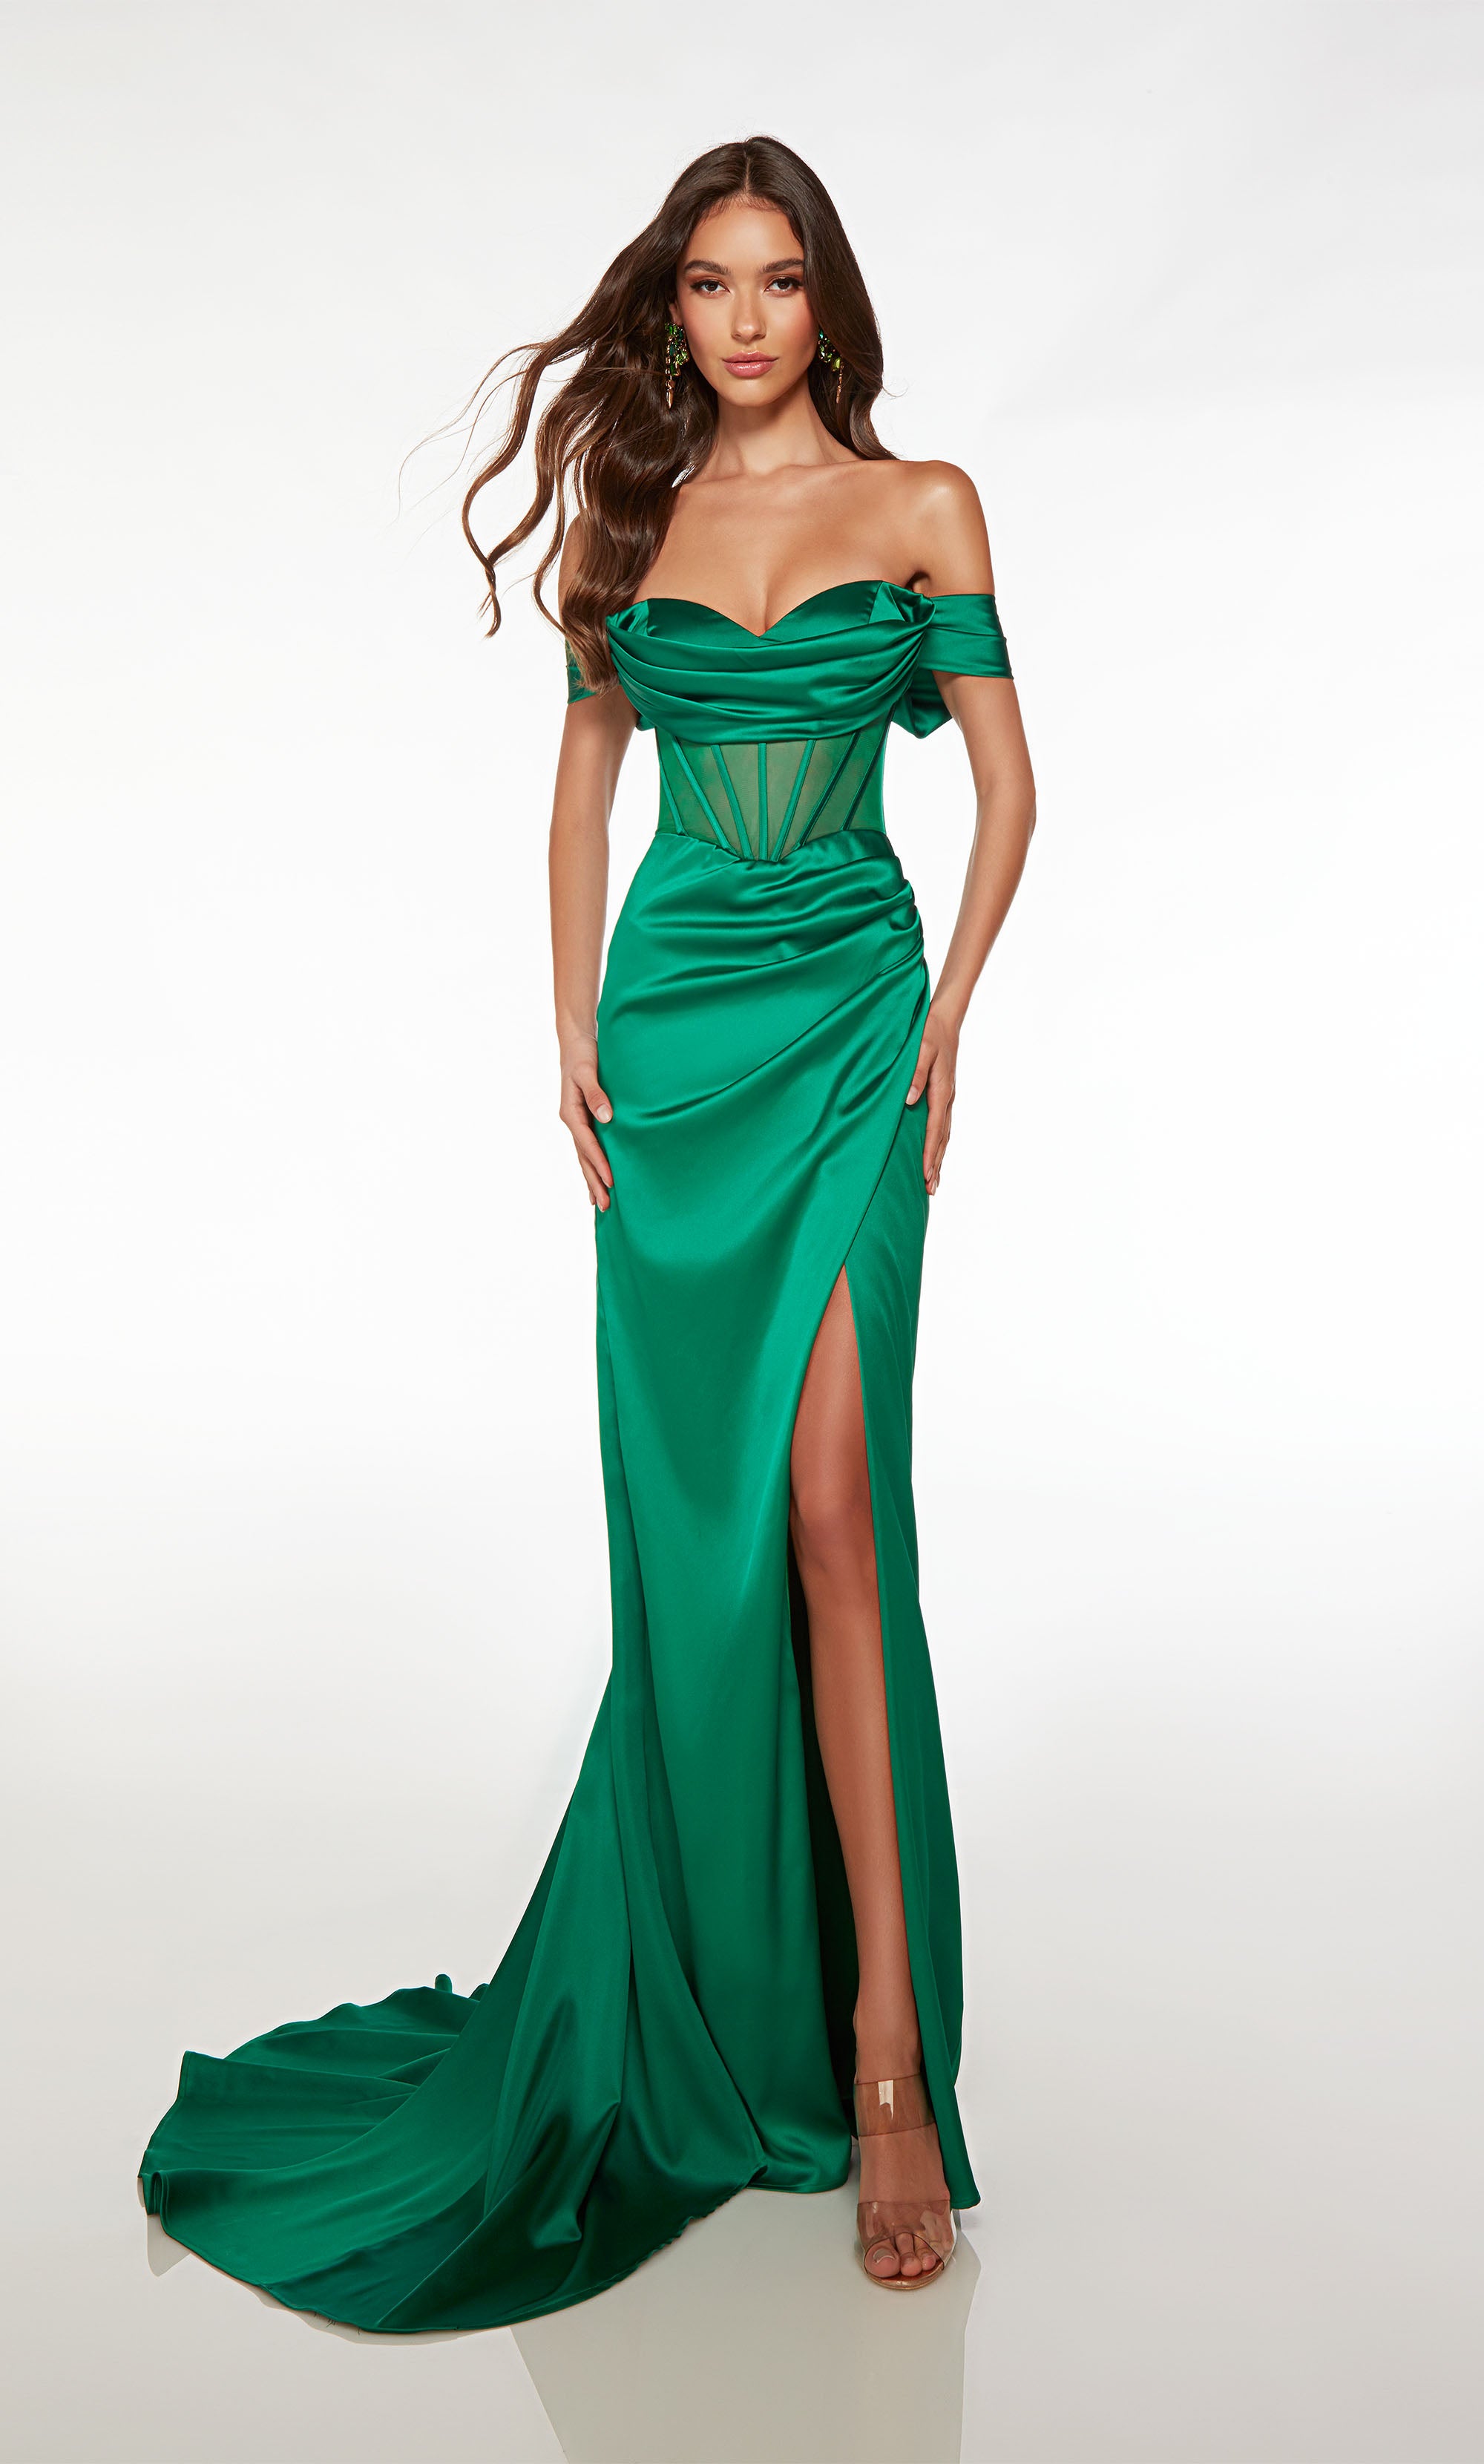 Emerald ball gown. | Green wedding dresses, Lace ball gowns, Emerald green  prom dress long